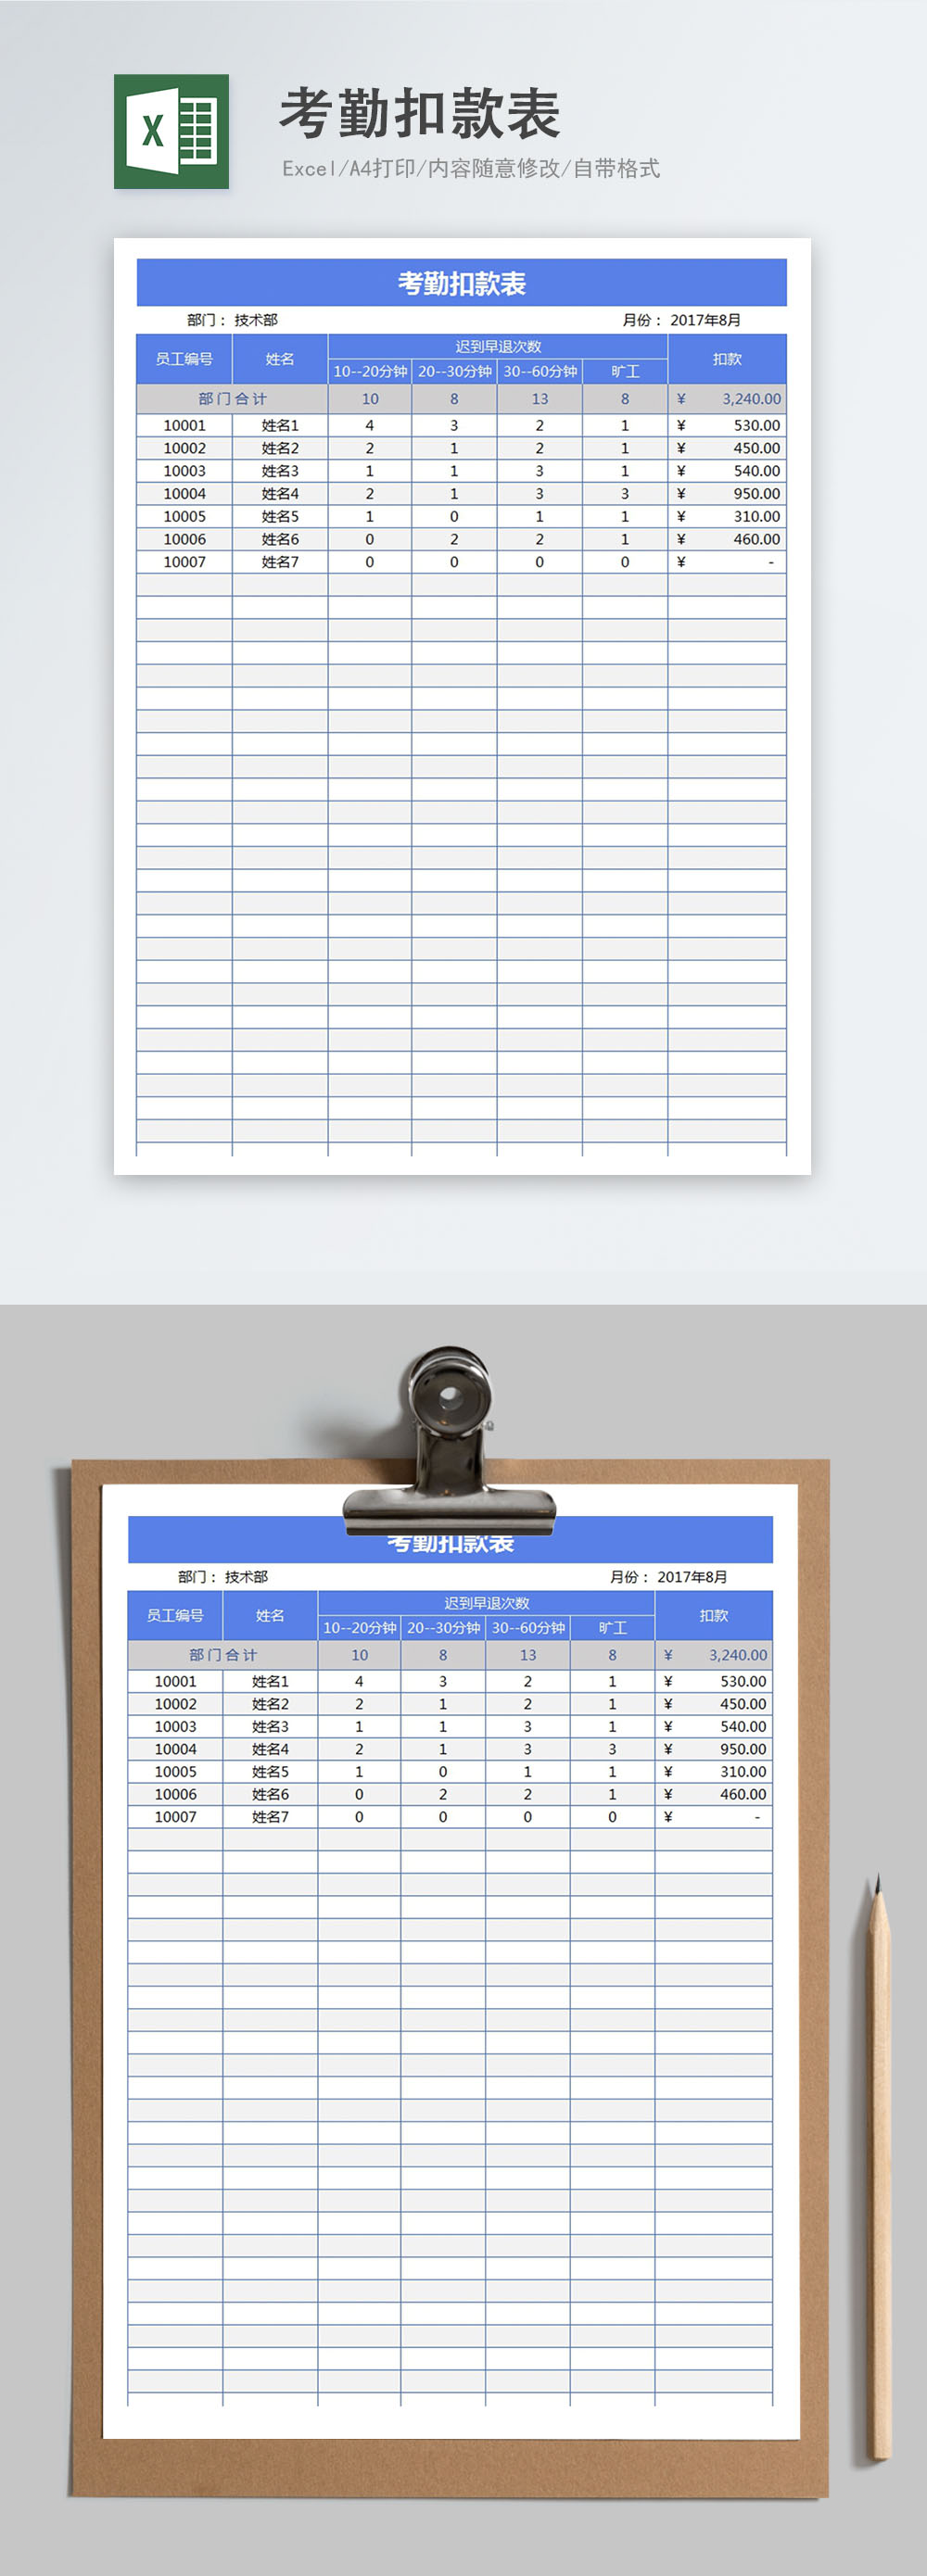 Attendance sheet excel template excel templete_free ...